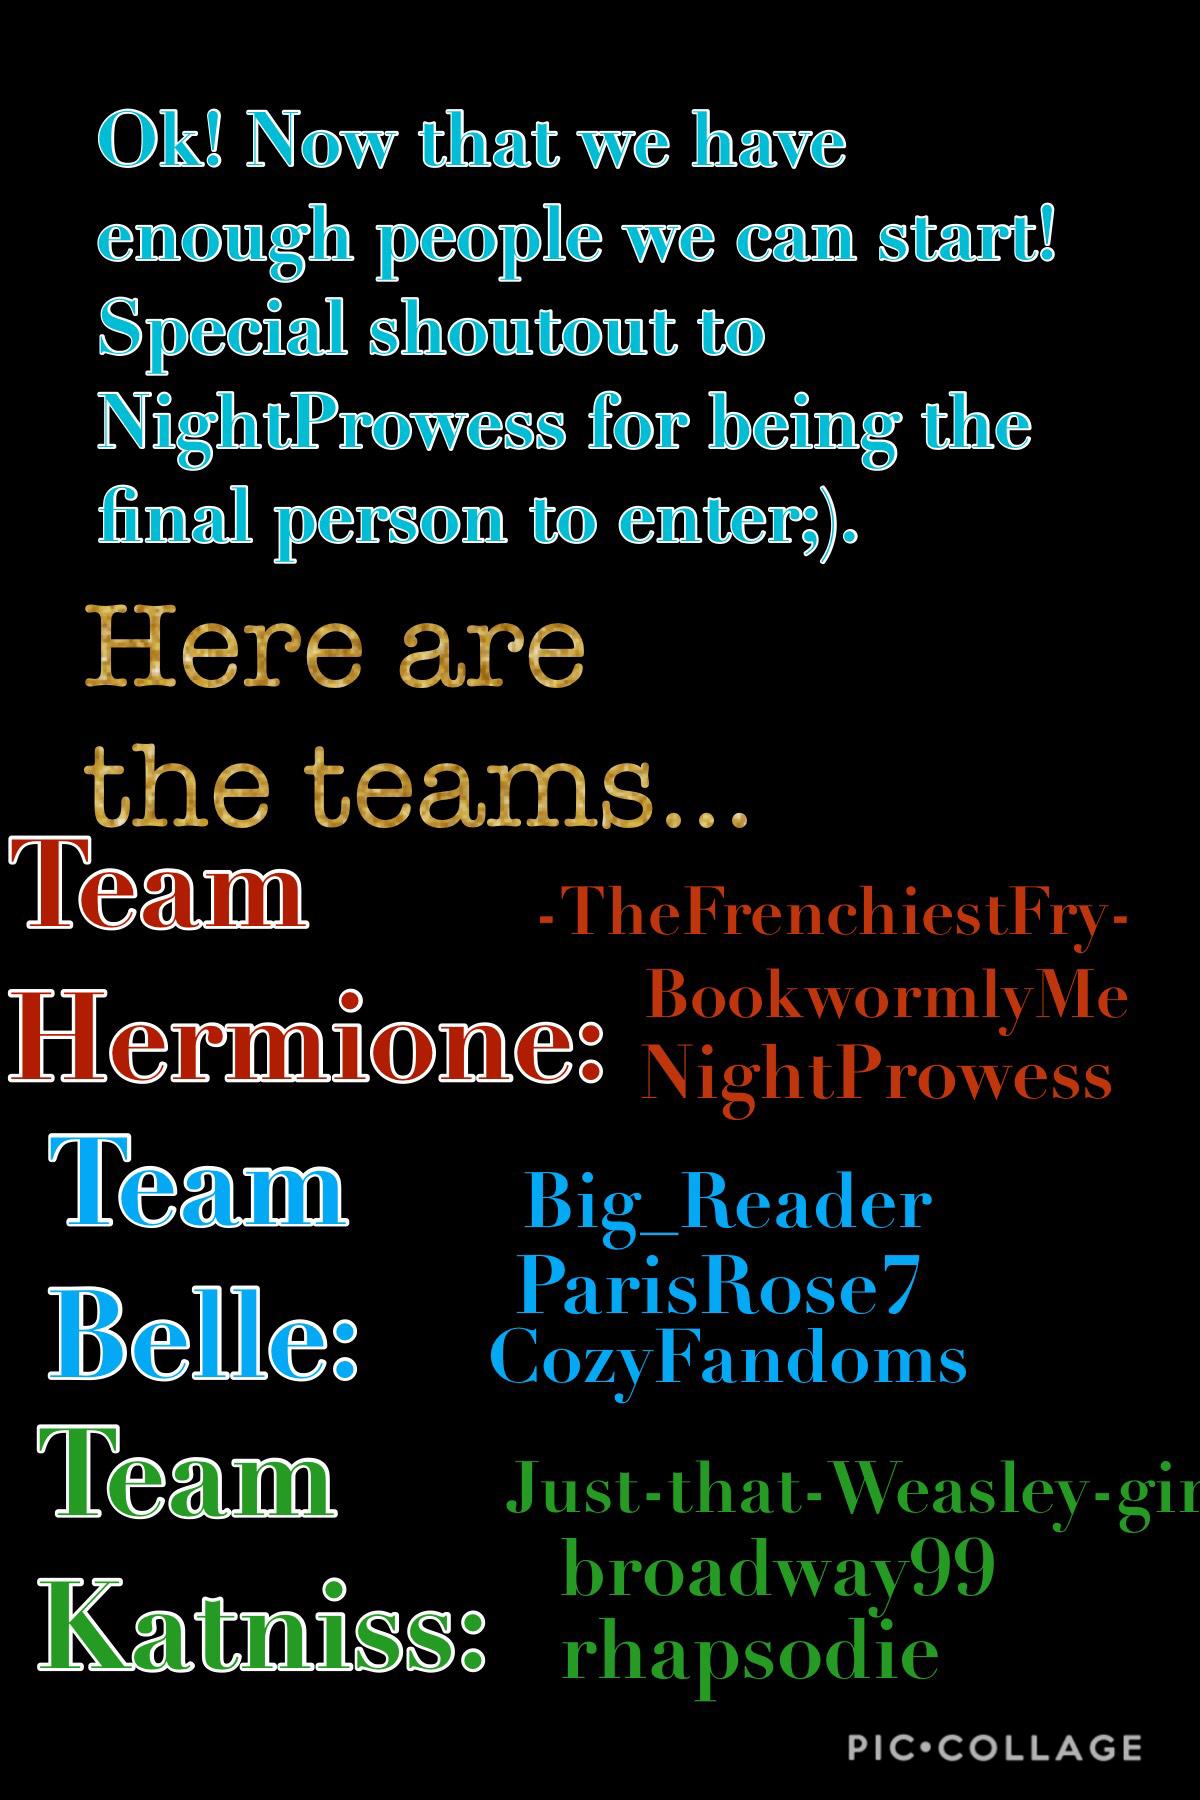 Here are your teams! The first round will be up sometime this week.